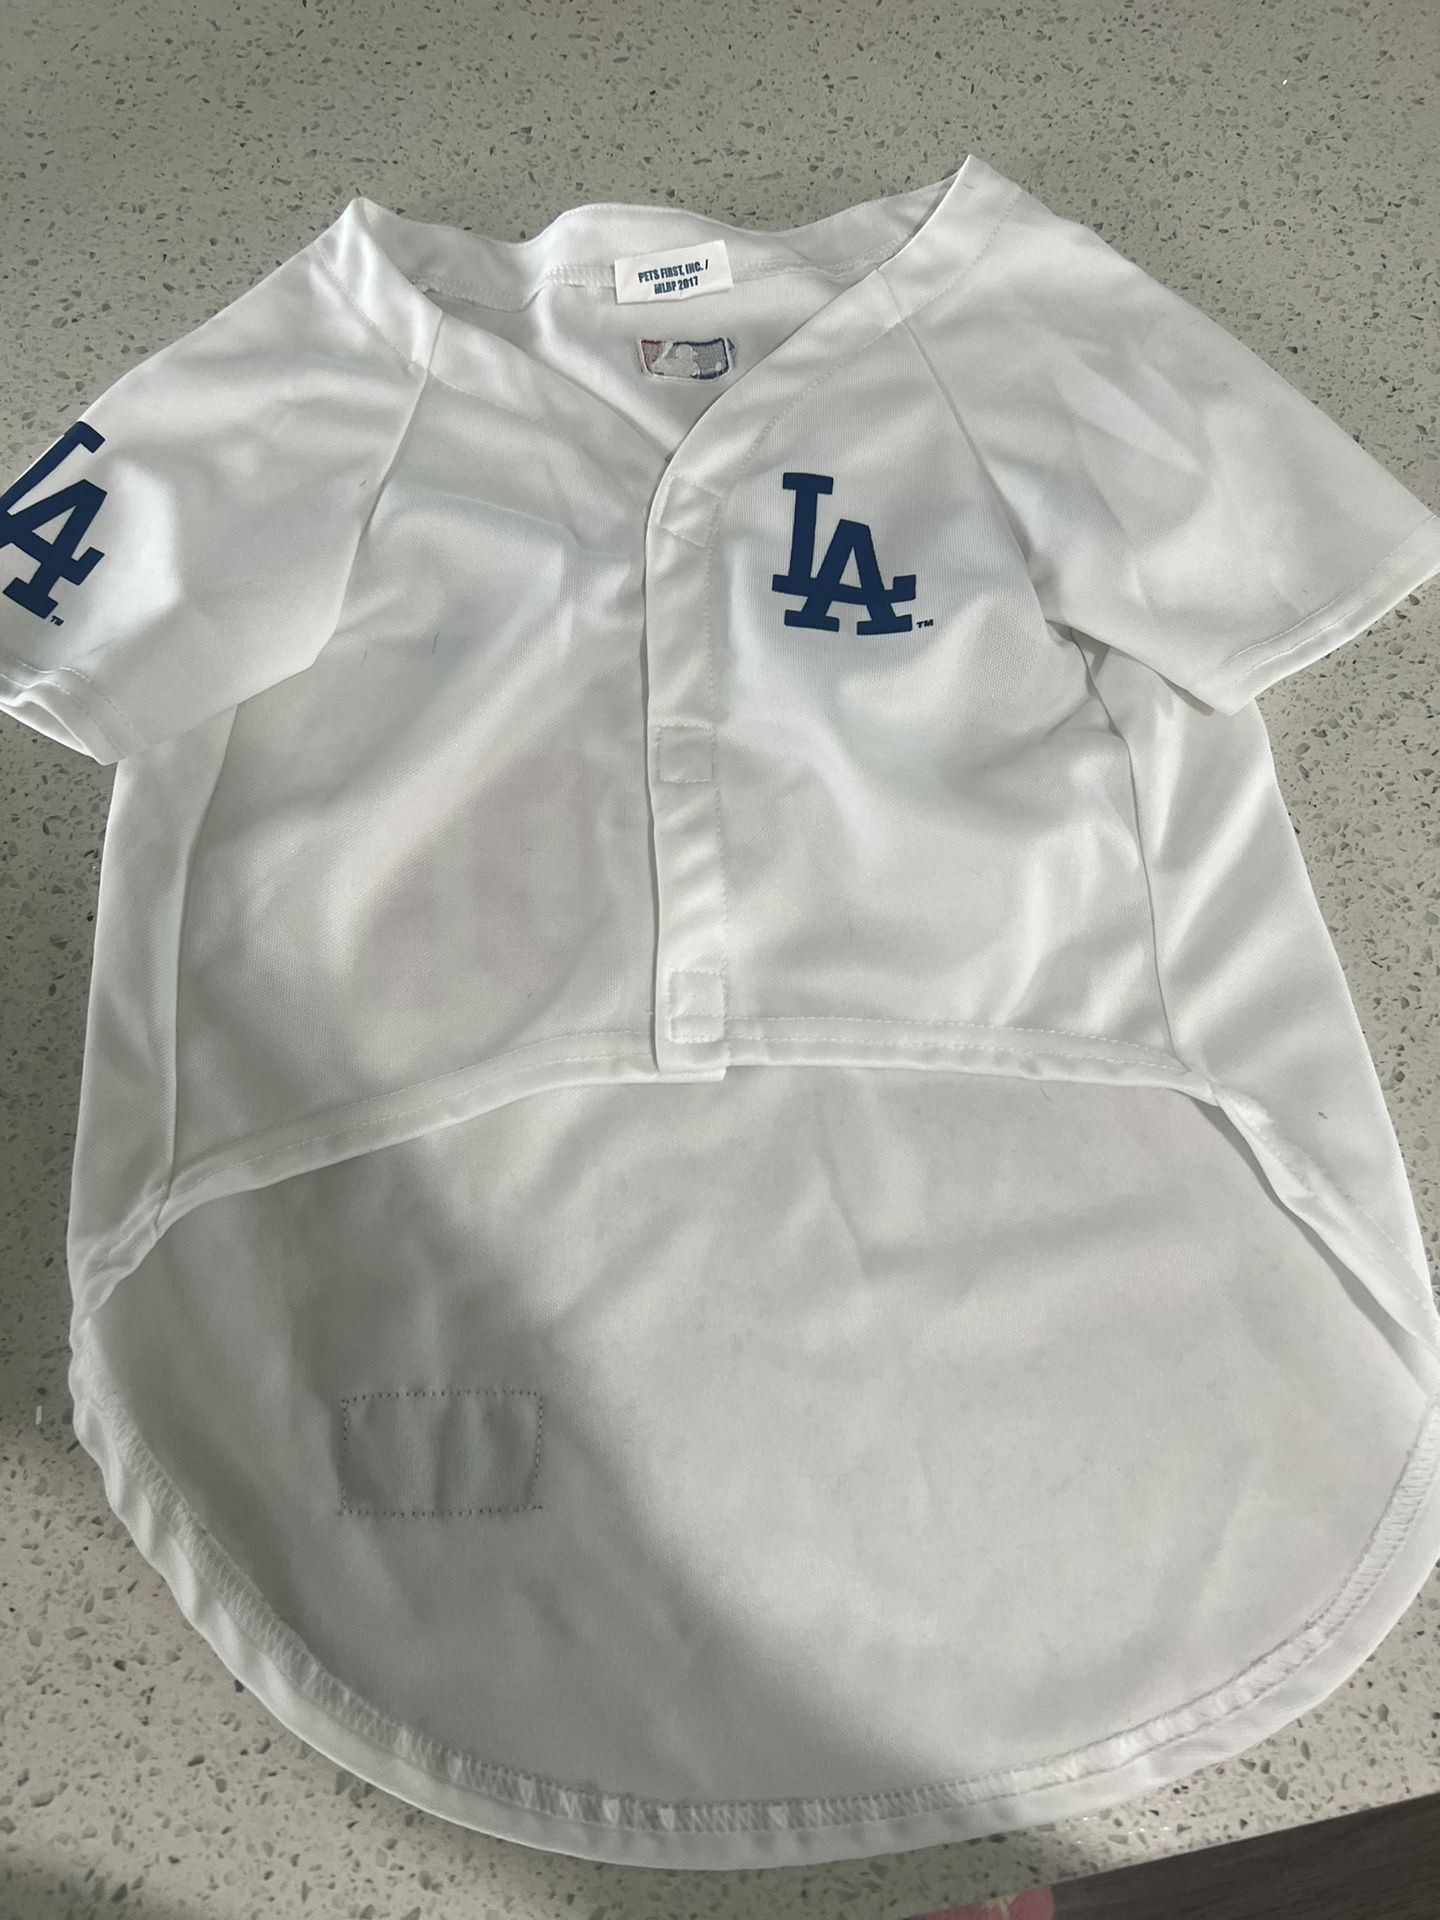 Large Dog Dodgers Jersey for Sale in Covina, CA - OfferUp